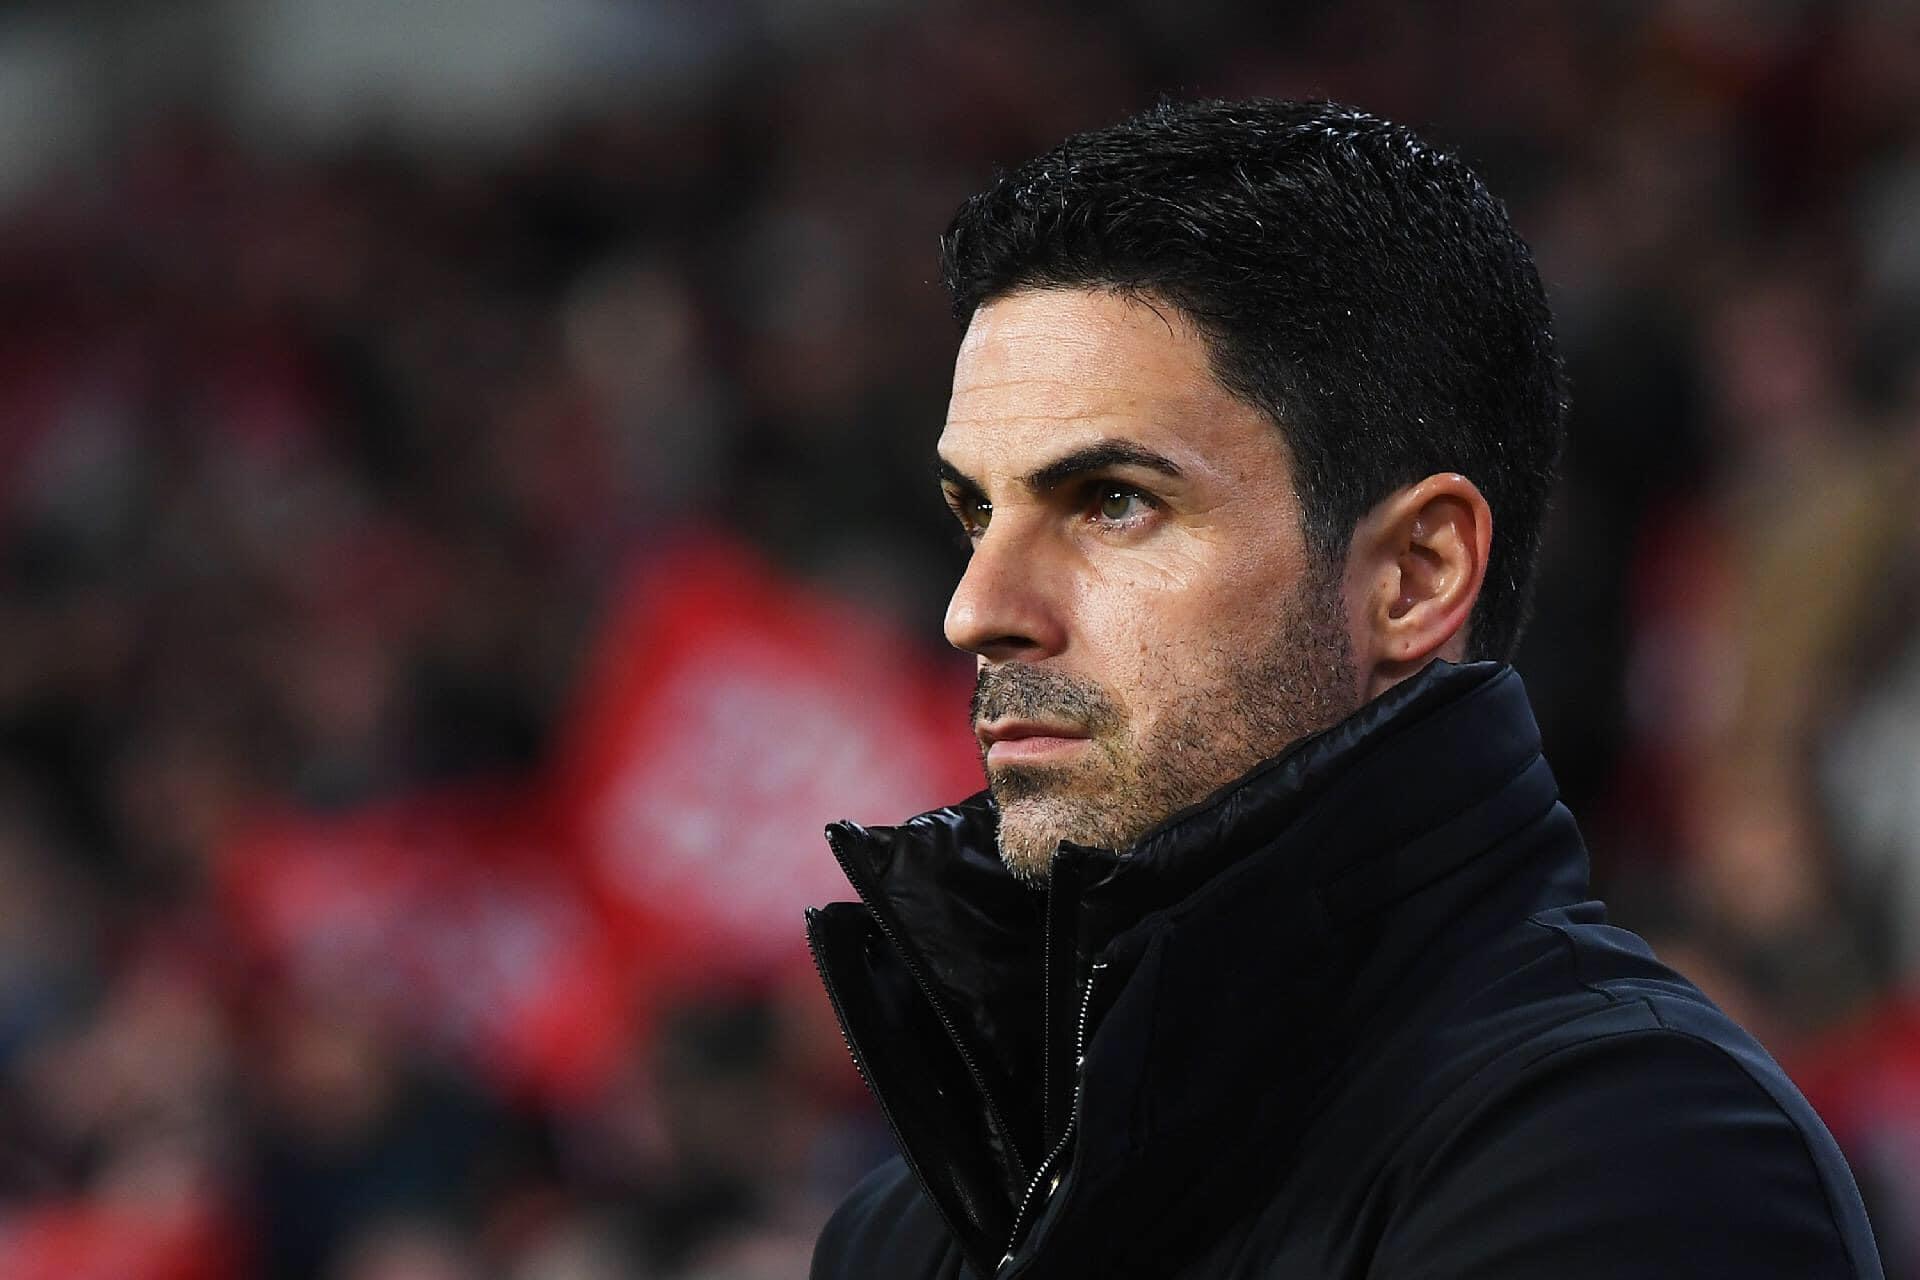 You are currently viewing Arteta wants managers, referees to work together to improve the game